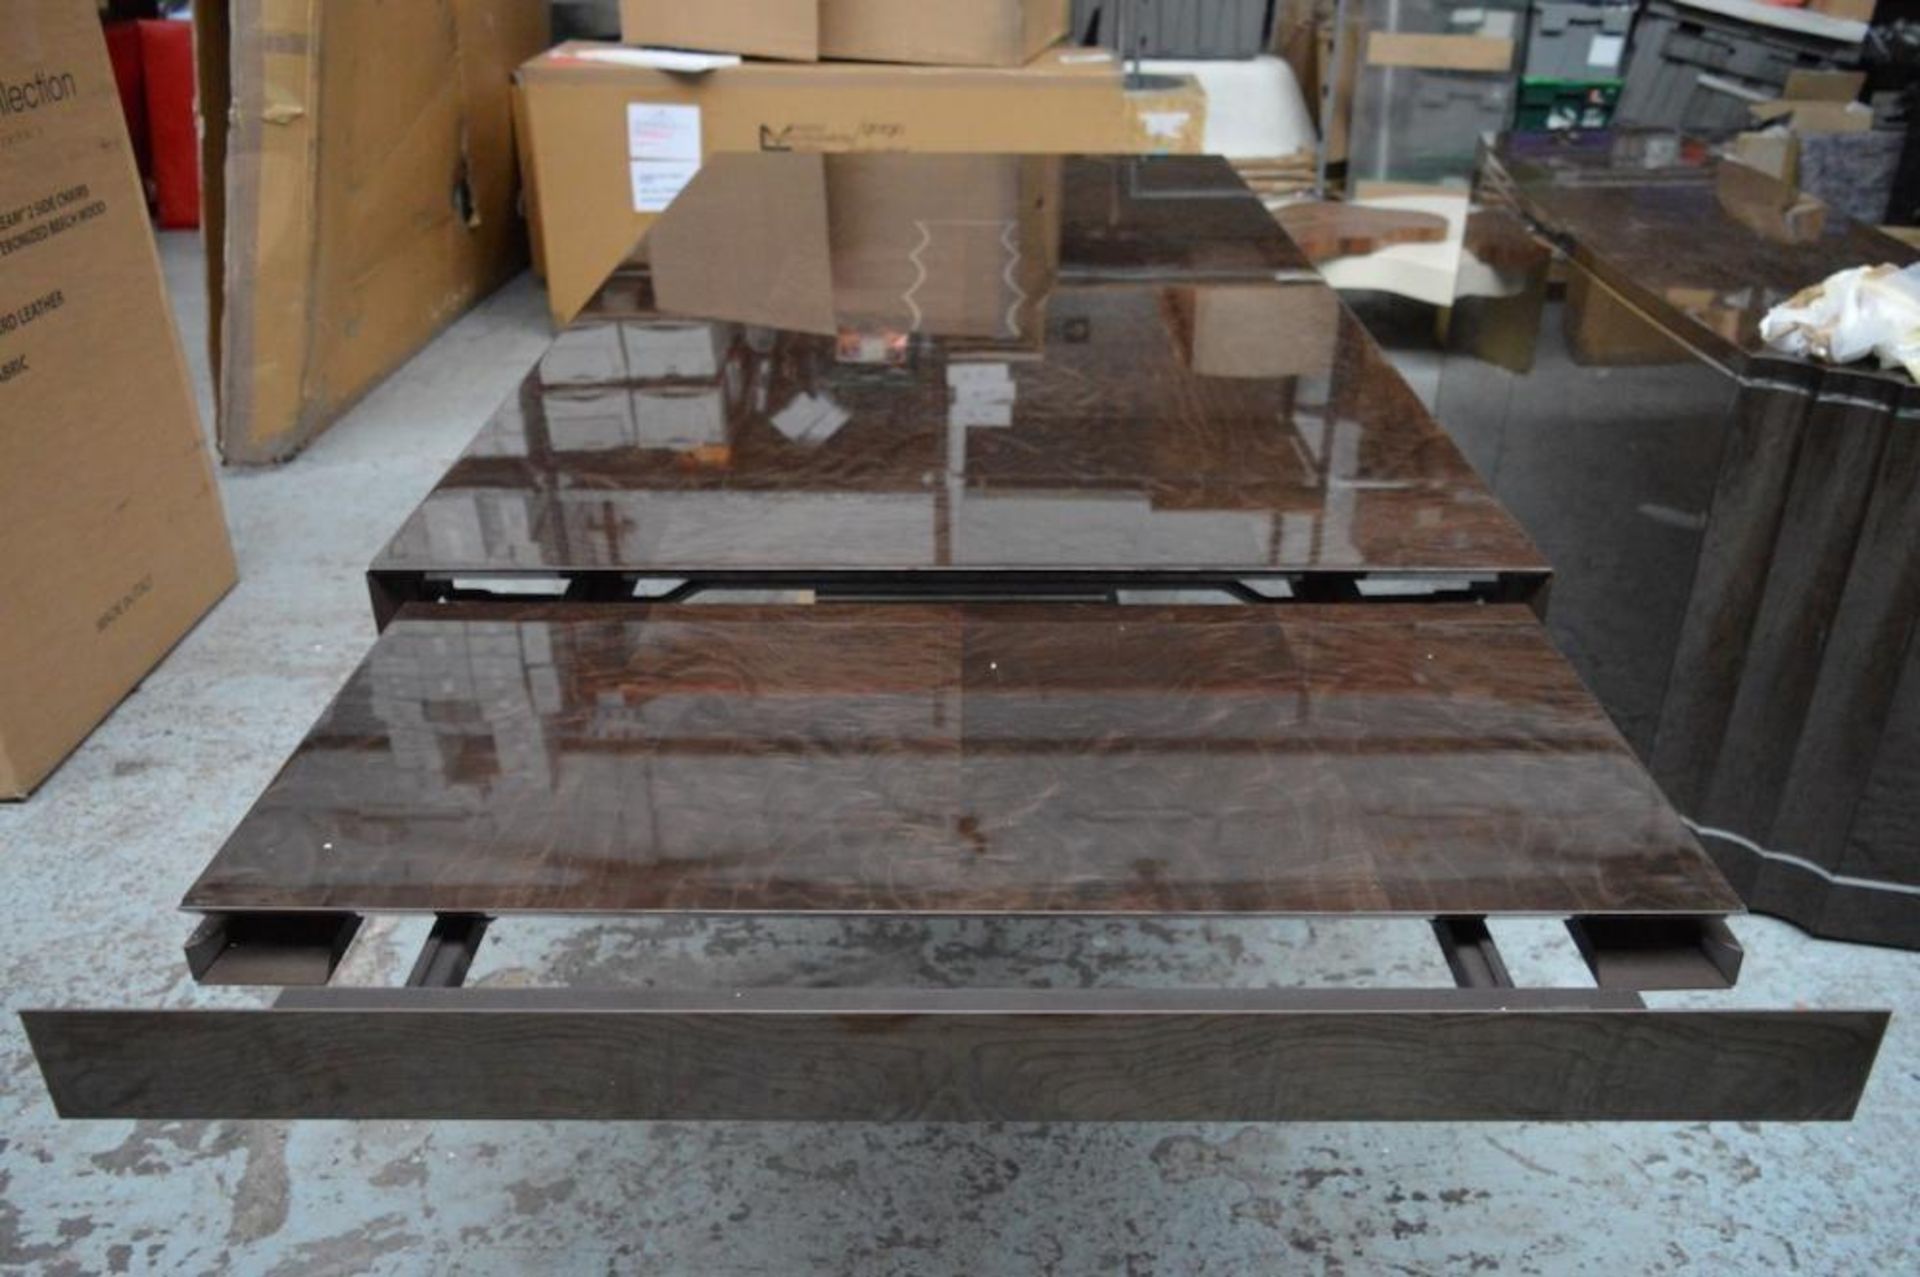 1 x Giorgio Absolute Dining Extension Table 4000 – Mako Japanese Tamos Burl Veneer With a High Gloss - Image 14 of 24